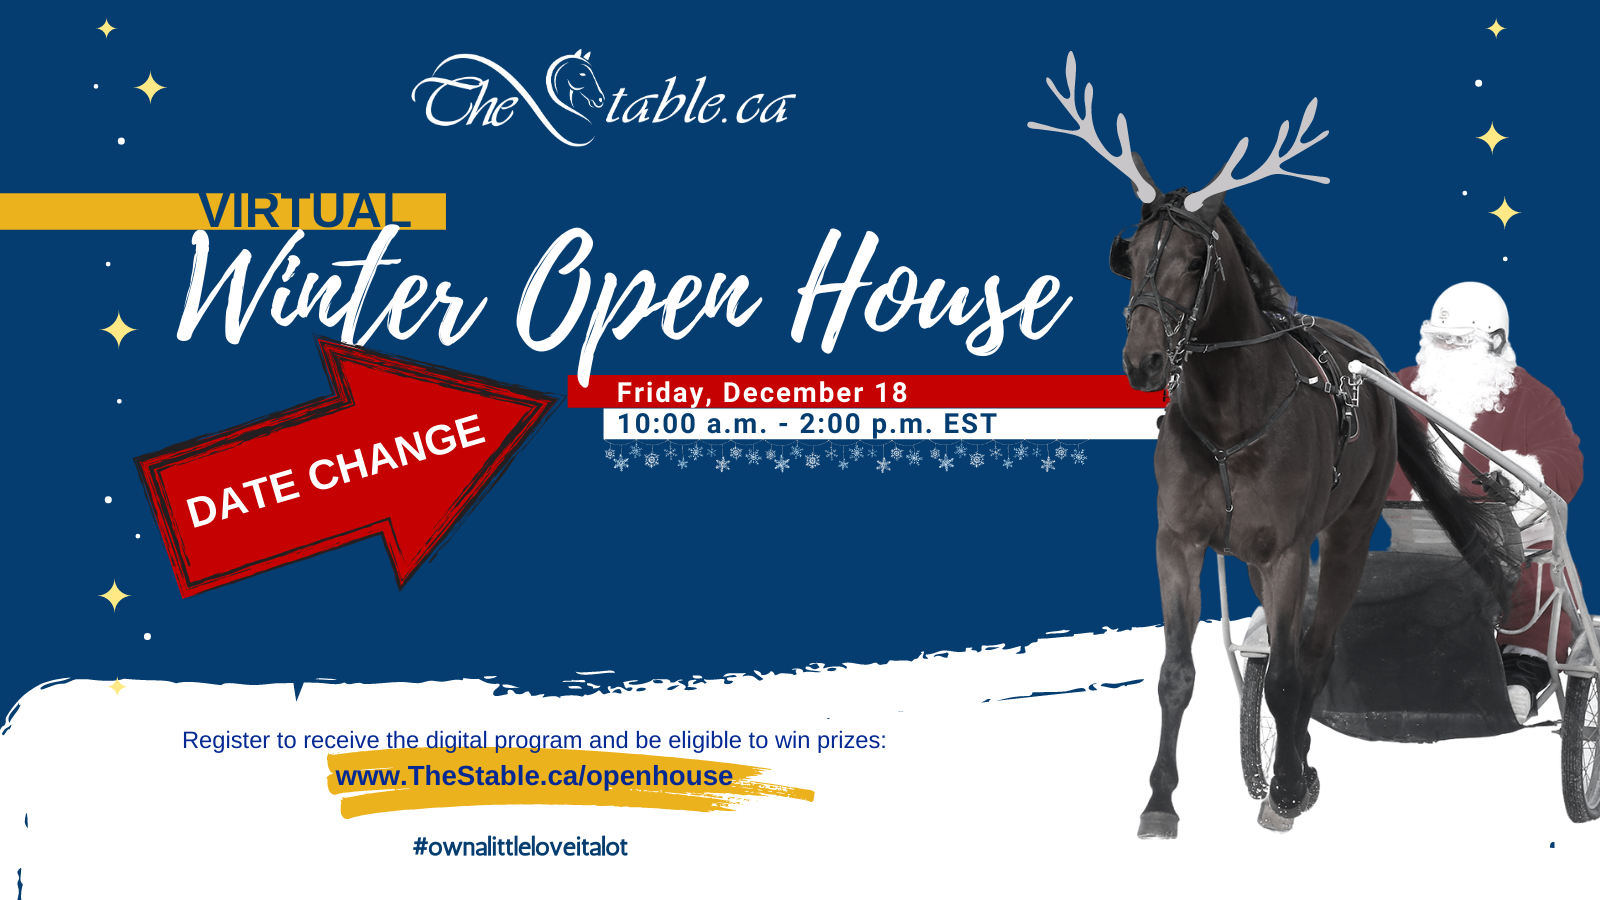 Date change for TheStable.ca Virtual Winter Open House